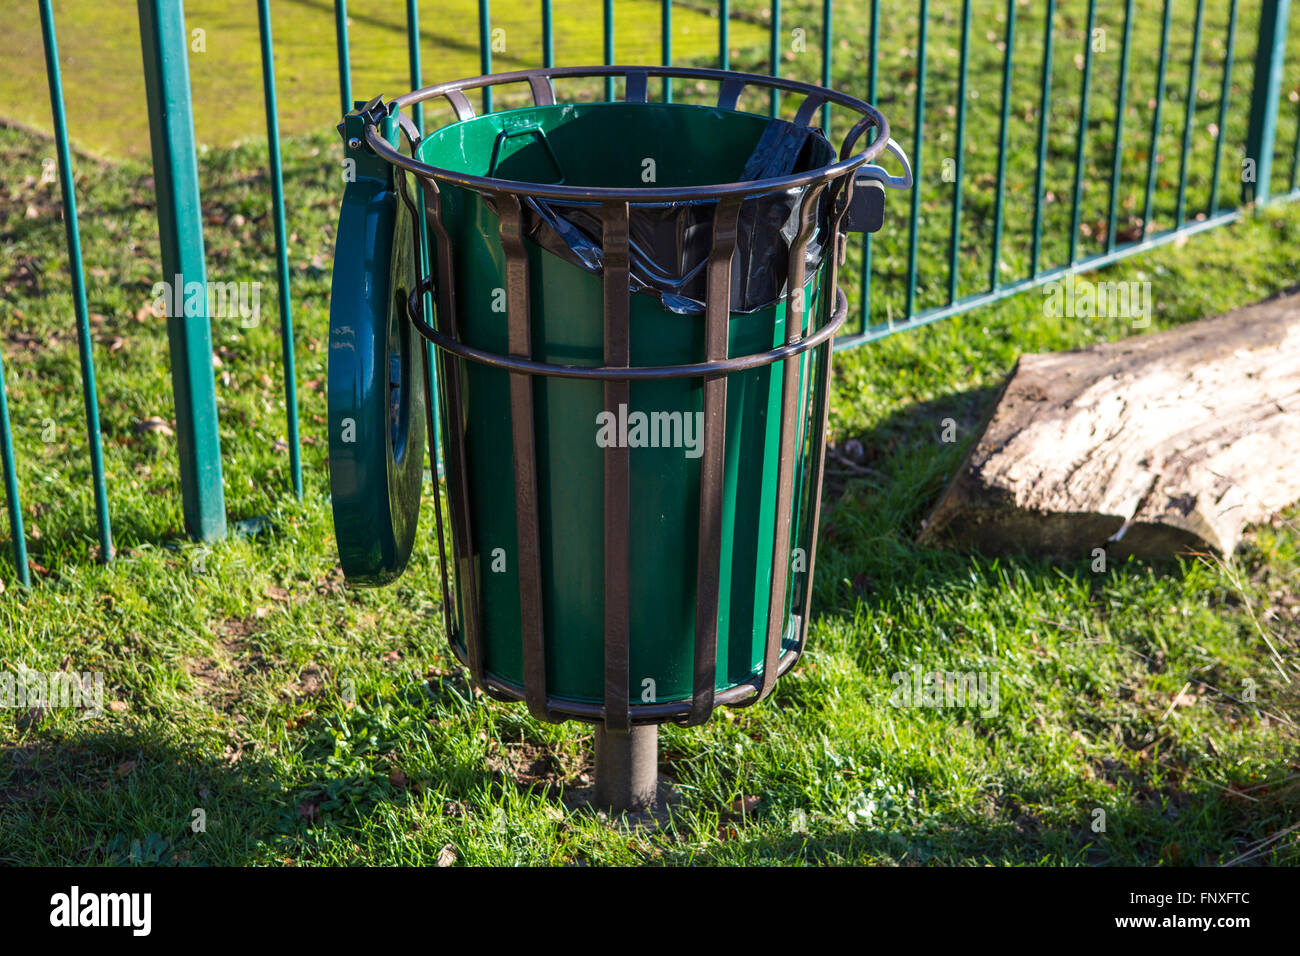 A large green waste bin in a UK park. Stock Photo